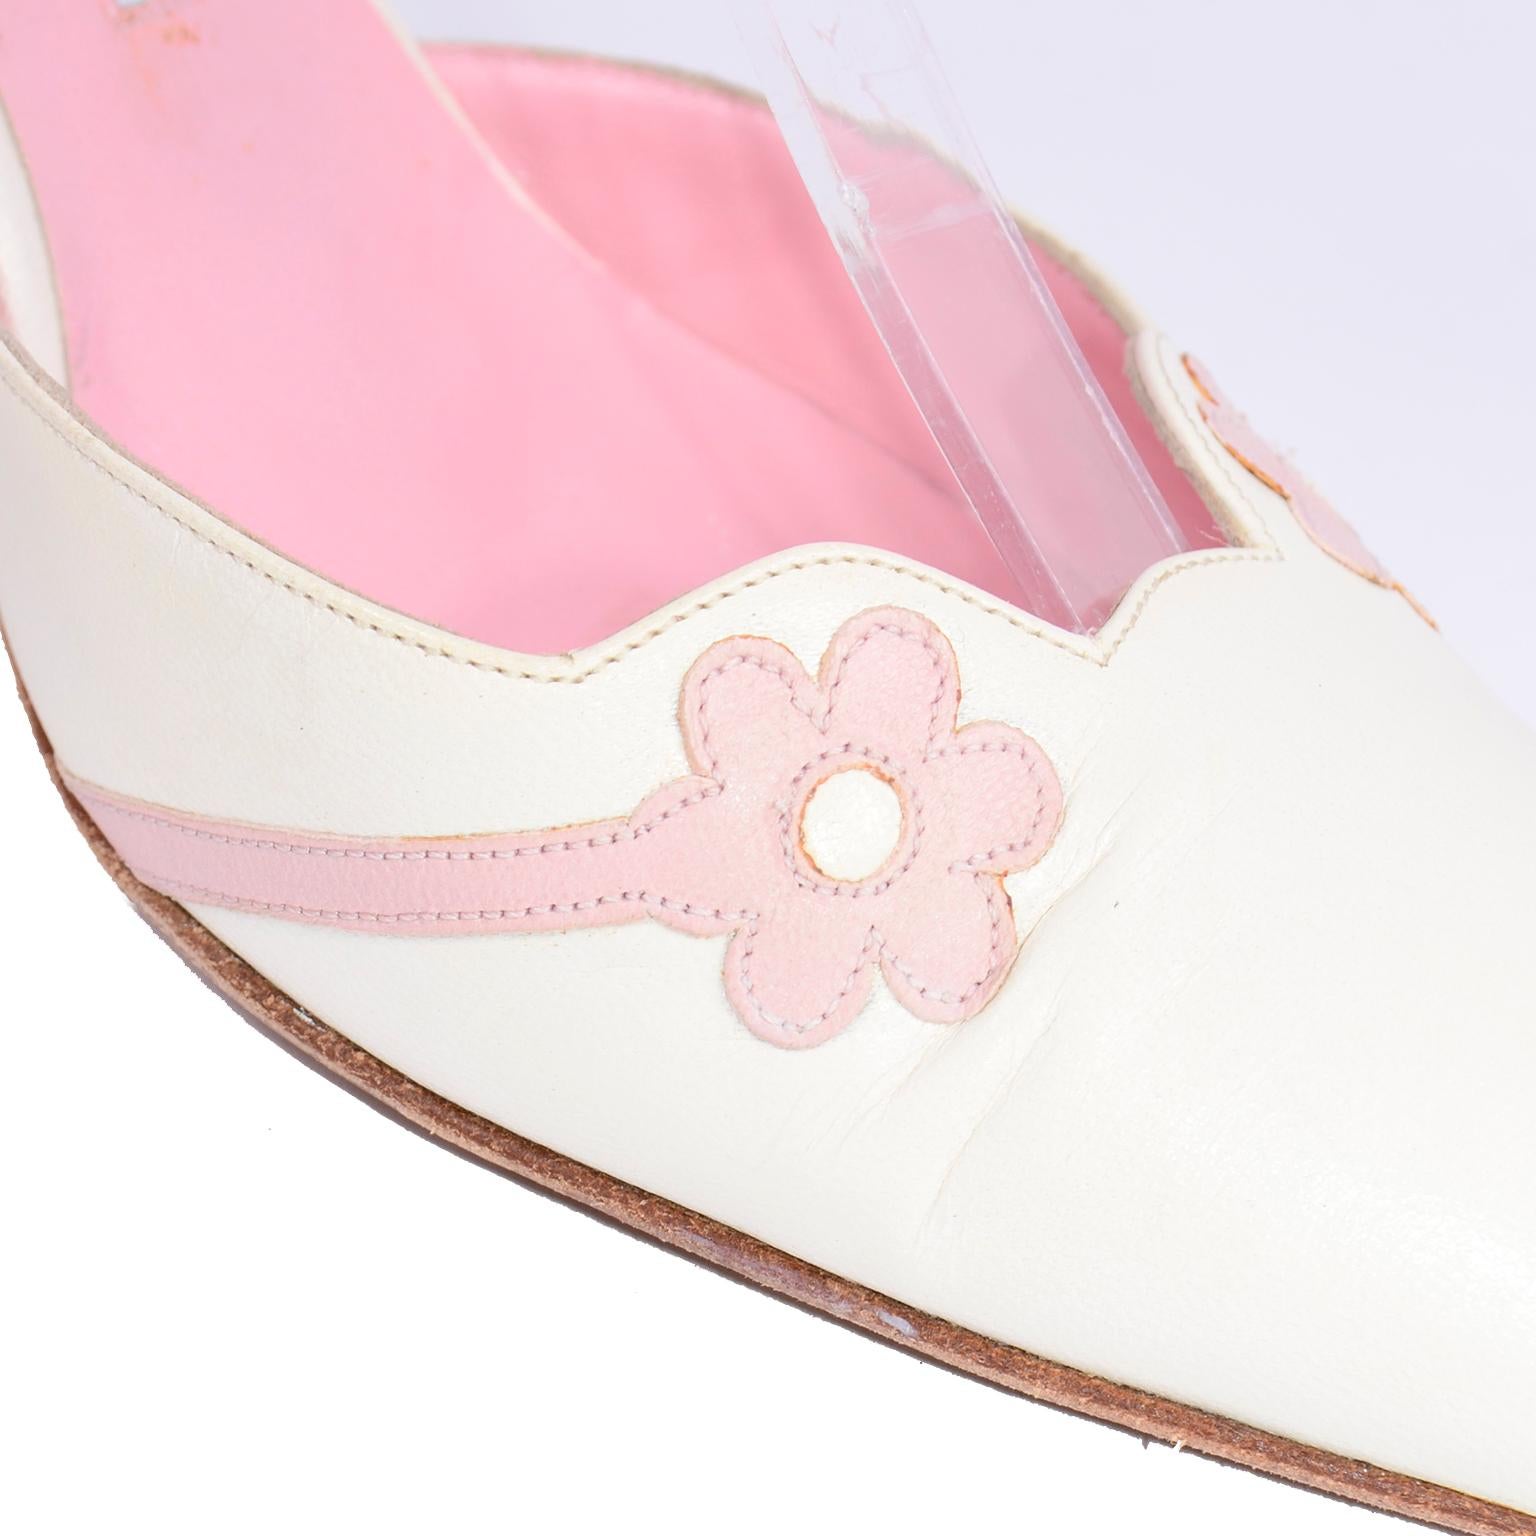 Ivory Leather Manolo Blahnik Shoes With Pink Daisy Flowers and Ankle Straps 4